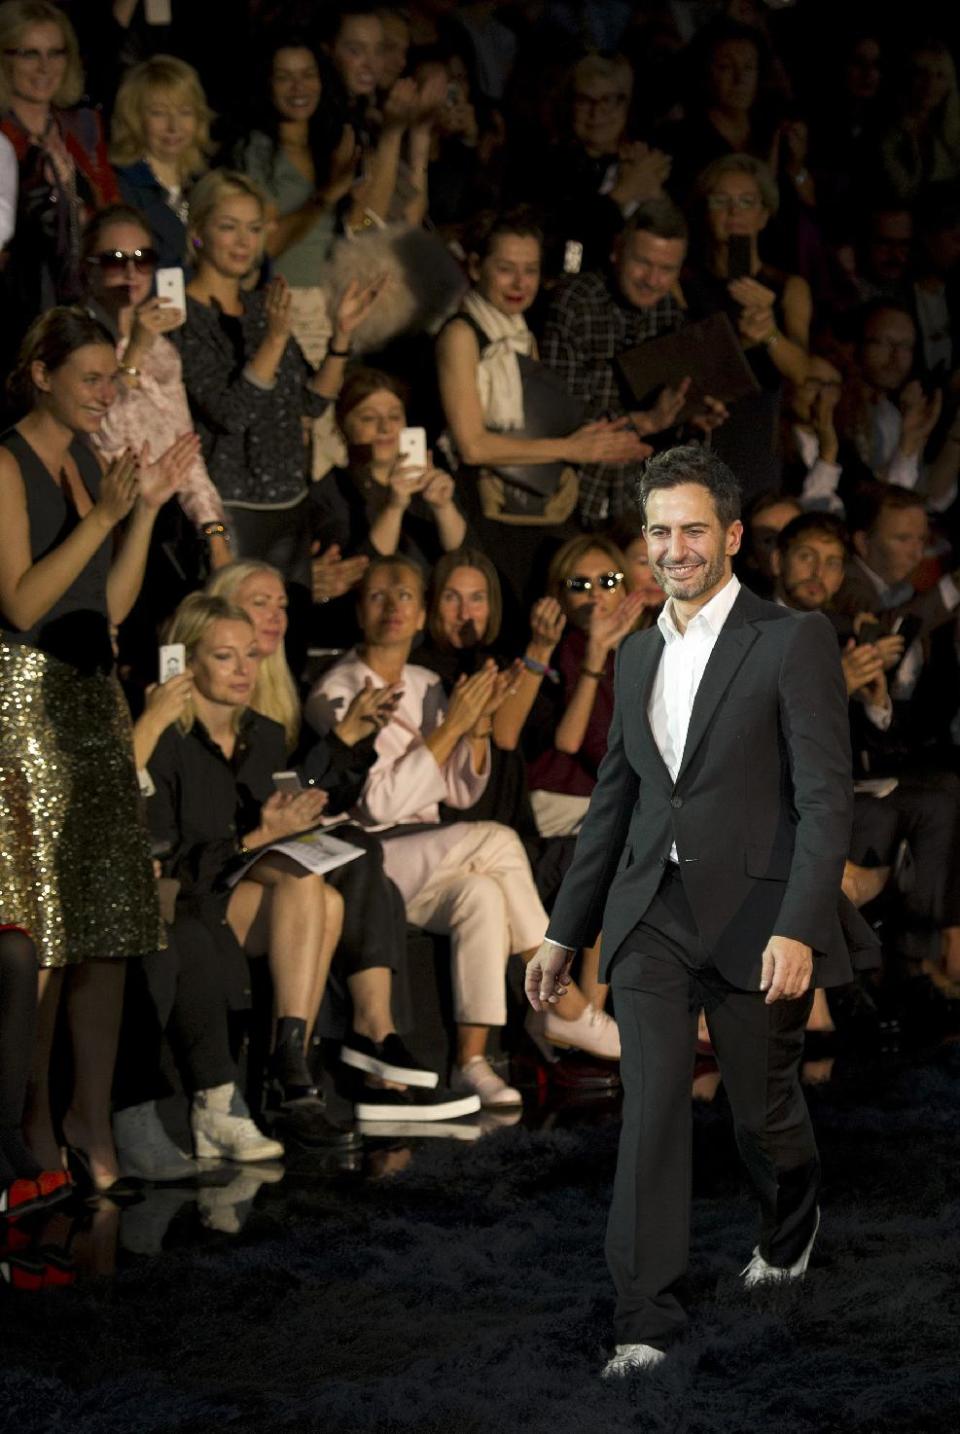 Fashion designer Marc Jacobs acknowledges applause following the presentation of the ready-to-wear Spring/Summer 2014 fashion collection he designed for Vuitton, Wednesday, Oct. 2, 2013 in Paris. (AP Photo/Jacques Brinon)